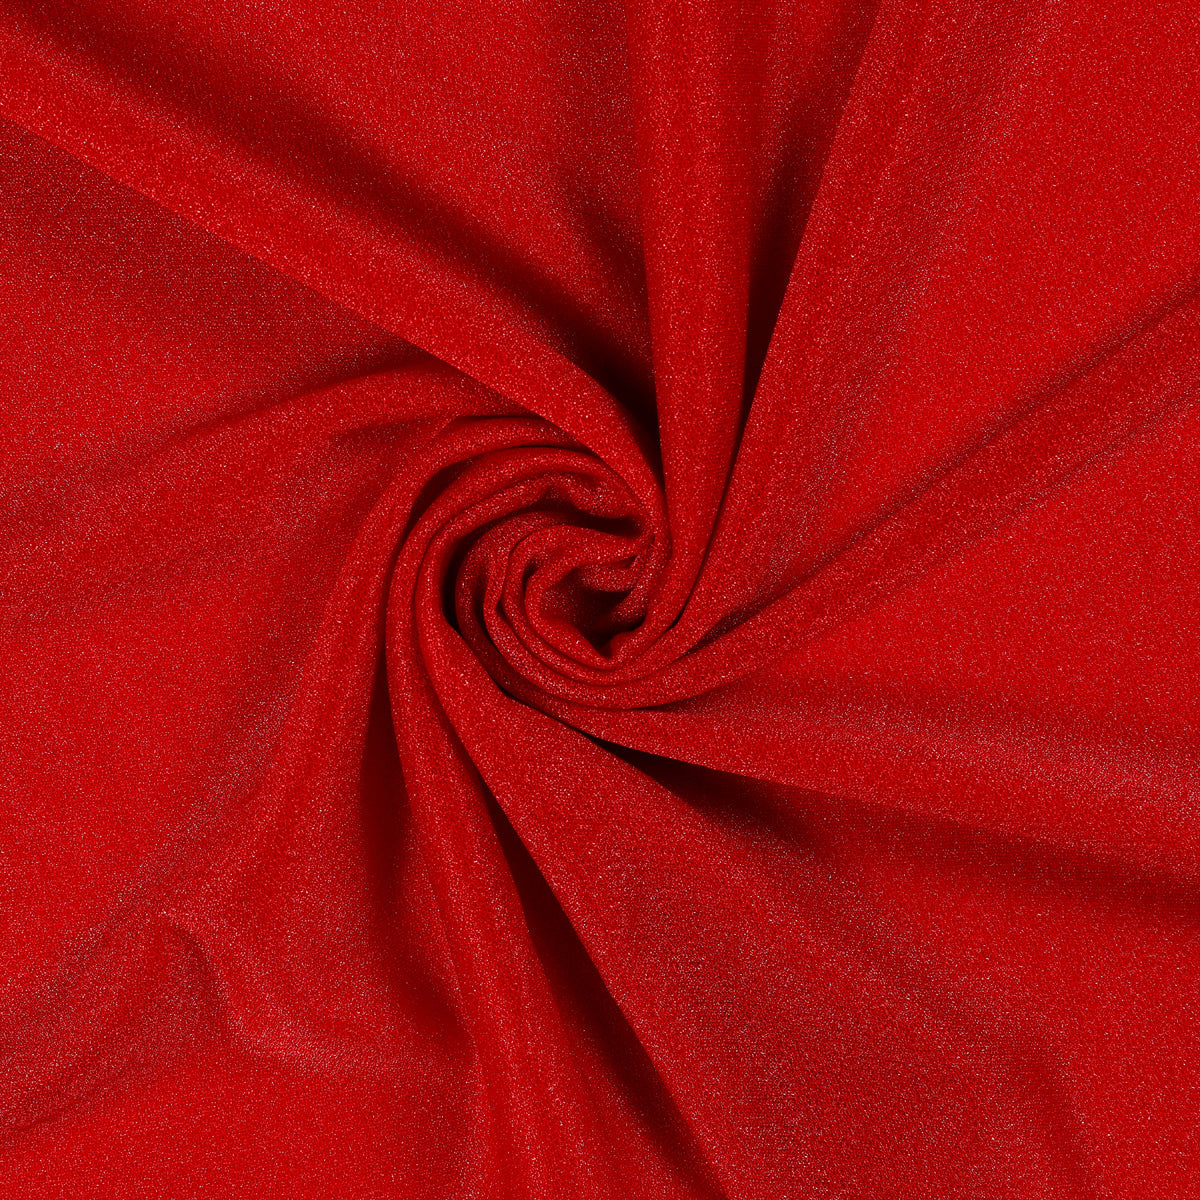 Red,e3d56a54-2090-4b72-bc58-144843132921